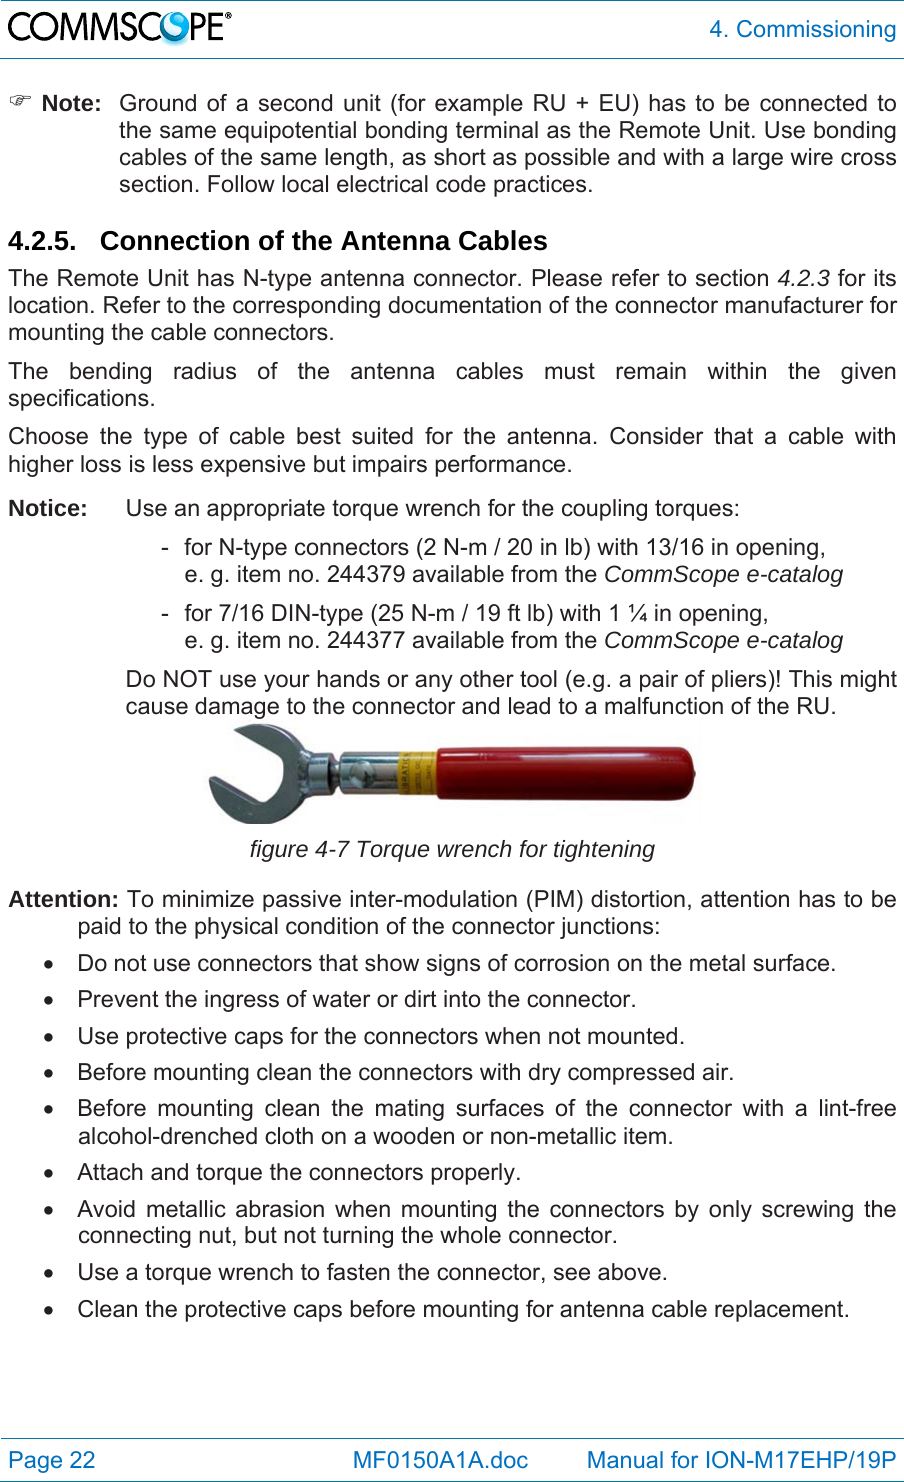  4. Commissioning Page 22            MF0150A1A.doc         Manual for ION-M17EHP/19P  Note:  Ground of a second unit (for example RU + EU) has to be connected to the same equipotential bonding terminal as the Remote Unit. Use bonding cables of the same length, as short as possible and with a large wire cross section. Follow local electrical code practices.  4.2.5. Connection of the Antenna Cables The Remote Unit has N-type antenna connector. Please refer to section 4.2.3 for its location. Refer to the corresponding documentation of the connector manufacturer for mounting the cable connectors.  The bending radius of the antenna cables must remain within the given specifications.  Choose the type of cable best suited for the antenna. Consider that a cable with higher loss is less expensive but impairs performance. Notice:  Use an appropriate torque wrench for the coupling torques:     -  for N-type connectors (2 N-m / 20 in lb) with 13/16 in opening,        e. g. item no. 244379 available from the CommScope e-catalog     -  for 7/16 DIN-type (25 N-m / 19 ft lb) with 1 ¼ in opening,        e. g. item no. 244377 available from the CommScope e-catalog Do NOT use your hands or any other tool (e.g. a pair of pliers)! This might cause damage to the connector and lead to a malfunction of the RU.  figure 4-7 Torque wrench for tightening Attention: To minimize passive inter-modulation (PIM) distortion, attention has to be paid to the physical condition of the connector junctions:   Do not use connectors that show signs of corrosion on the metal surface.   Prevent the ingress of water or dirt into the connector.   Use protective caps for the connectors when not mounted.   Before mounting clean the connectors with dry compressed air.   Before mounting clean the mating surfaces of the connector with a lint-free alcohol-drenched cloth on a wooden or non-metallic item.   Attach and torque the connectors properly.   Avoid metallic abrasion when mounting the connectors by only screwing the connecting nut, but not turning the whole connector.   Use a torque wrench to fasten the connector, see above.   Clean the protective caps before mounting for antenna cable replacement.  